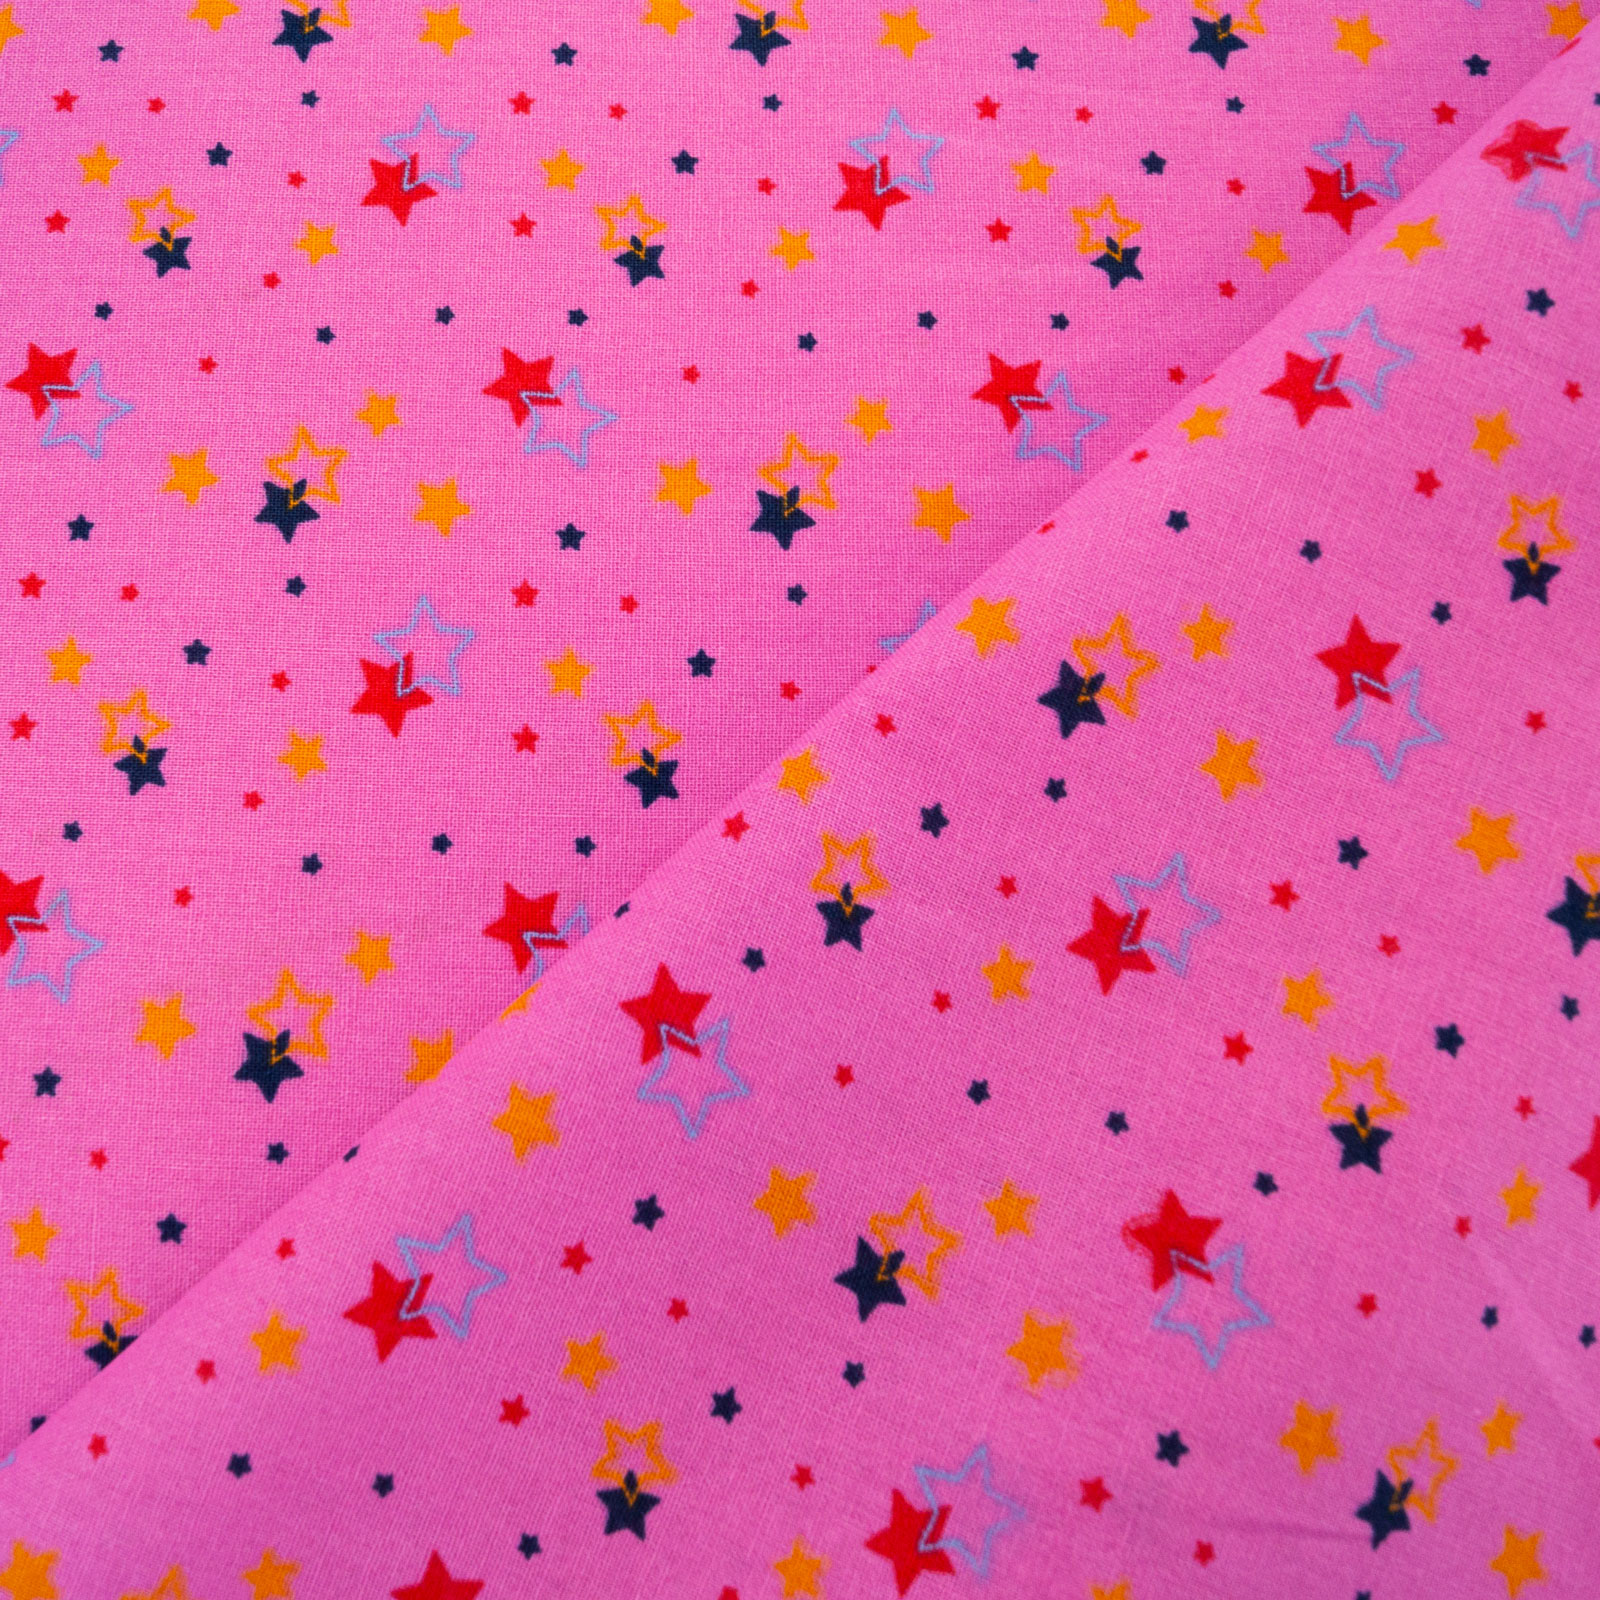 Cotton fabric - Starry sky pink